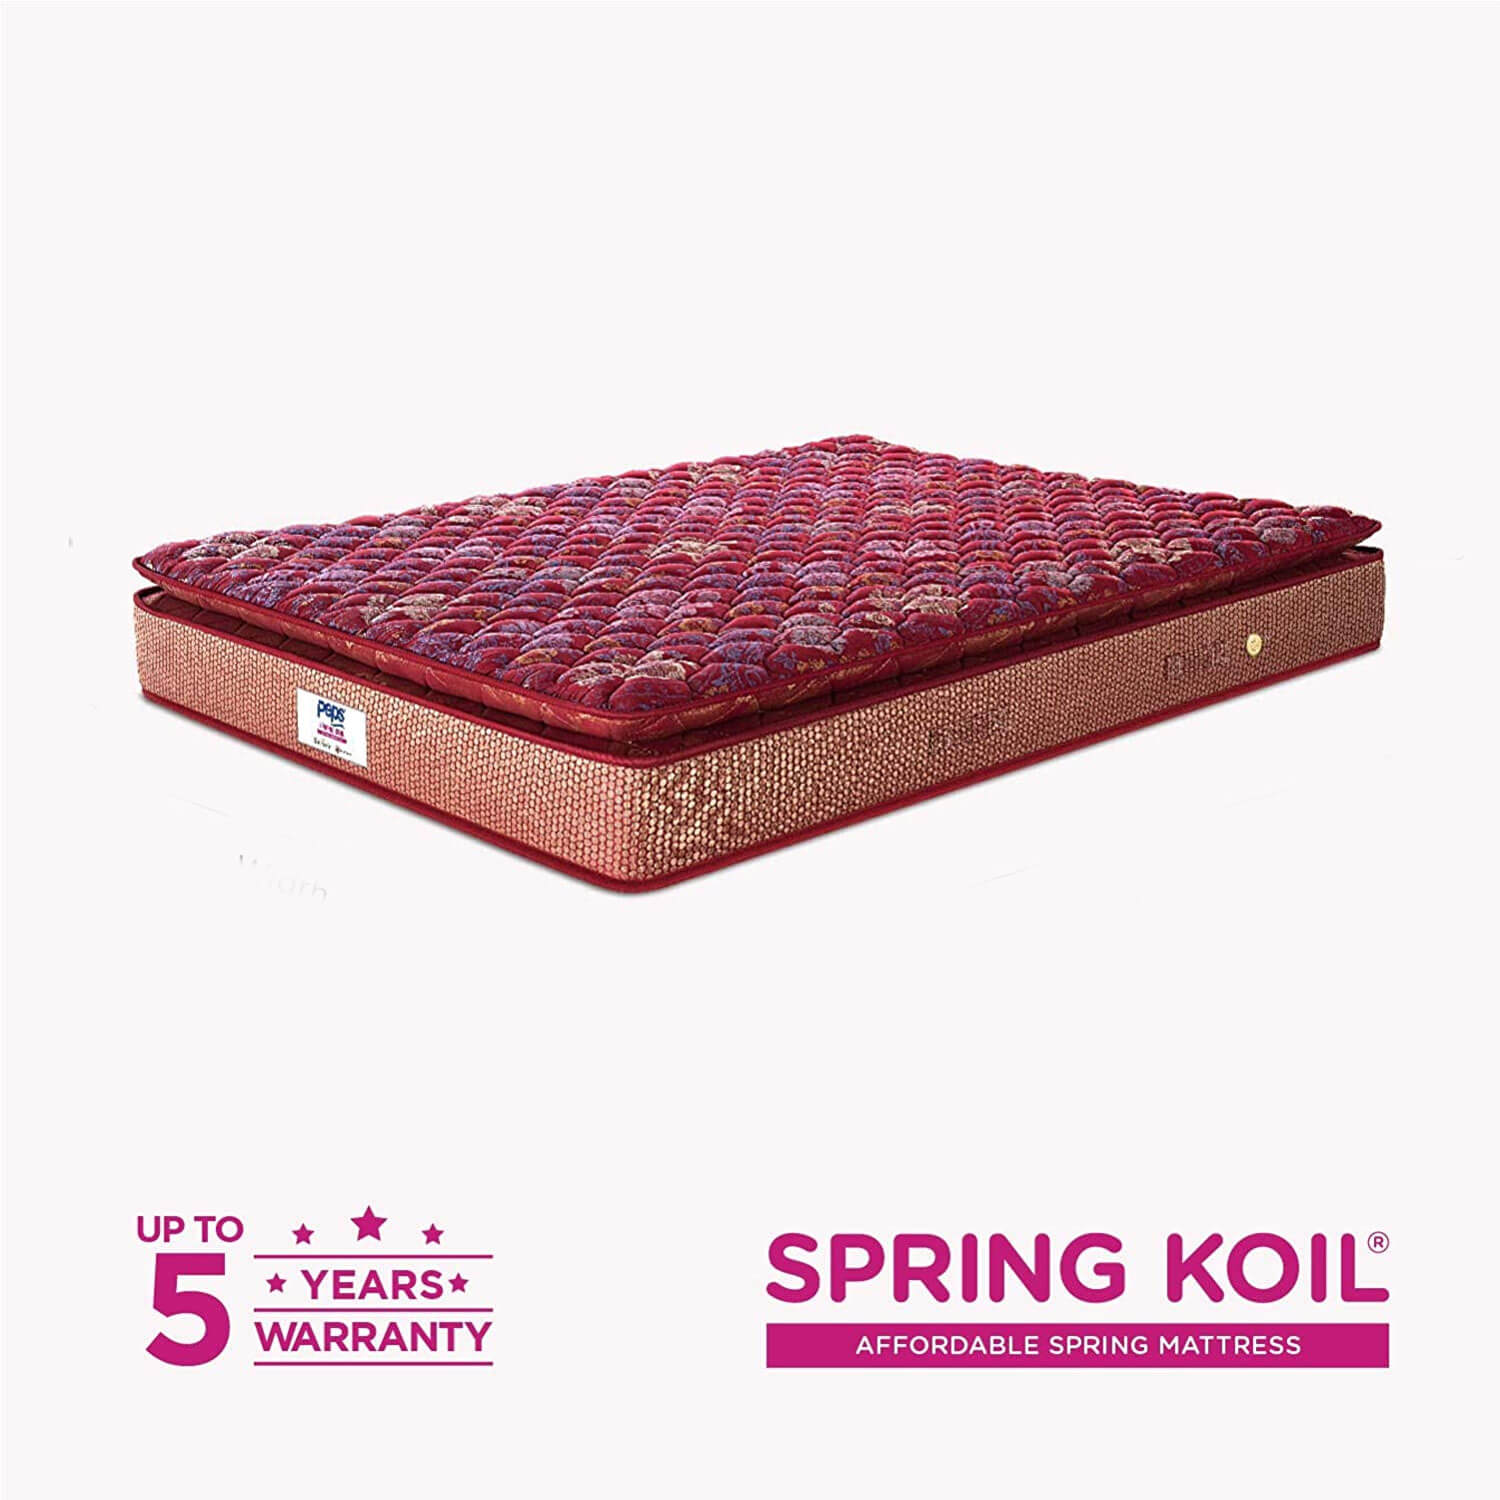 Peps Springkoil Bonnell Spring with Pillowtop Mattress